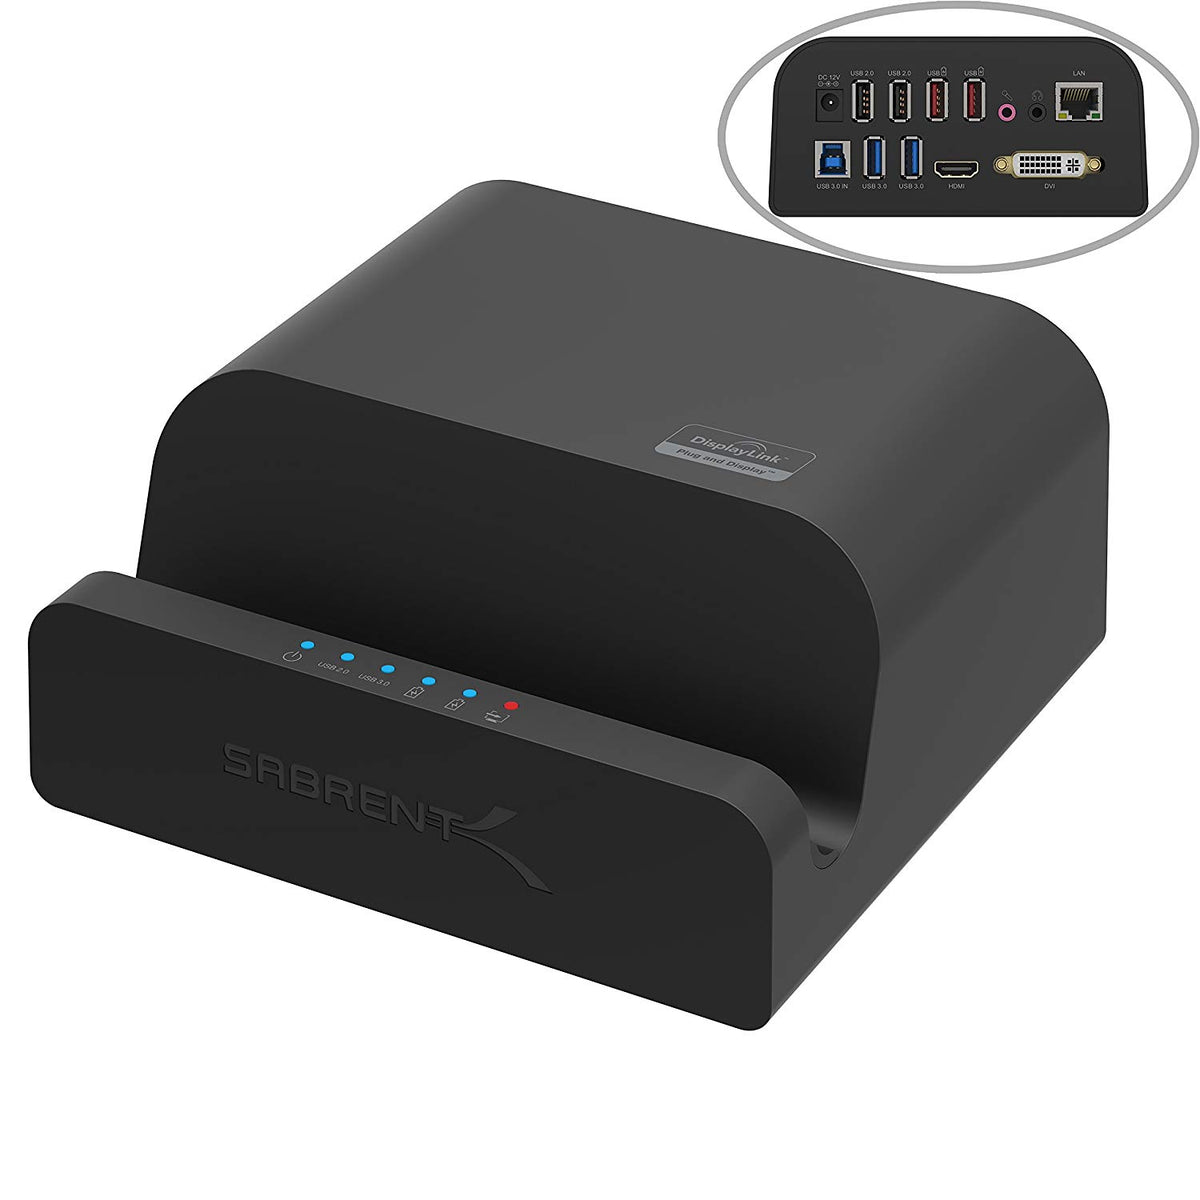 USB 3.0 Universal Docking Station with Stand for Tablets and Laptops